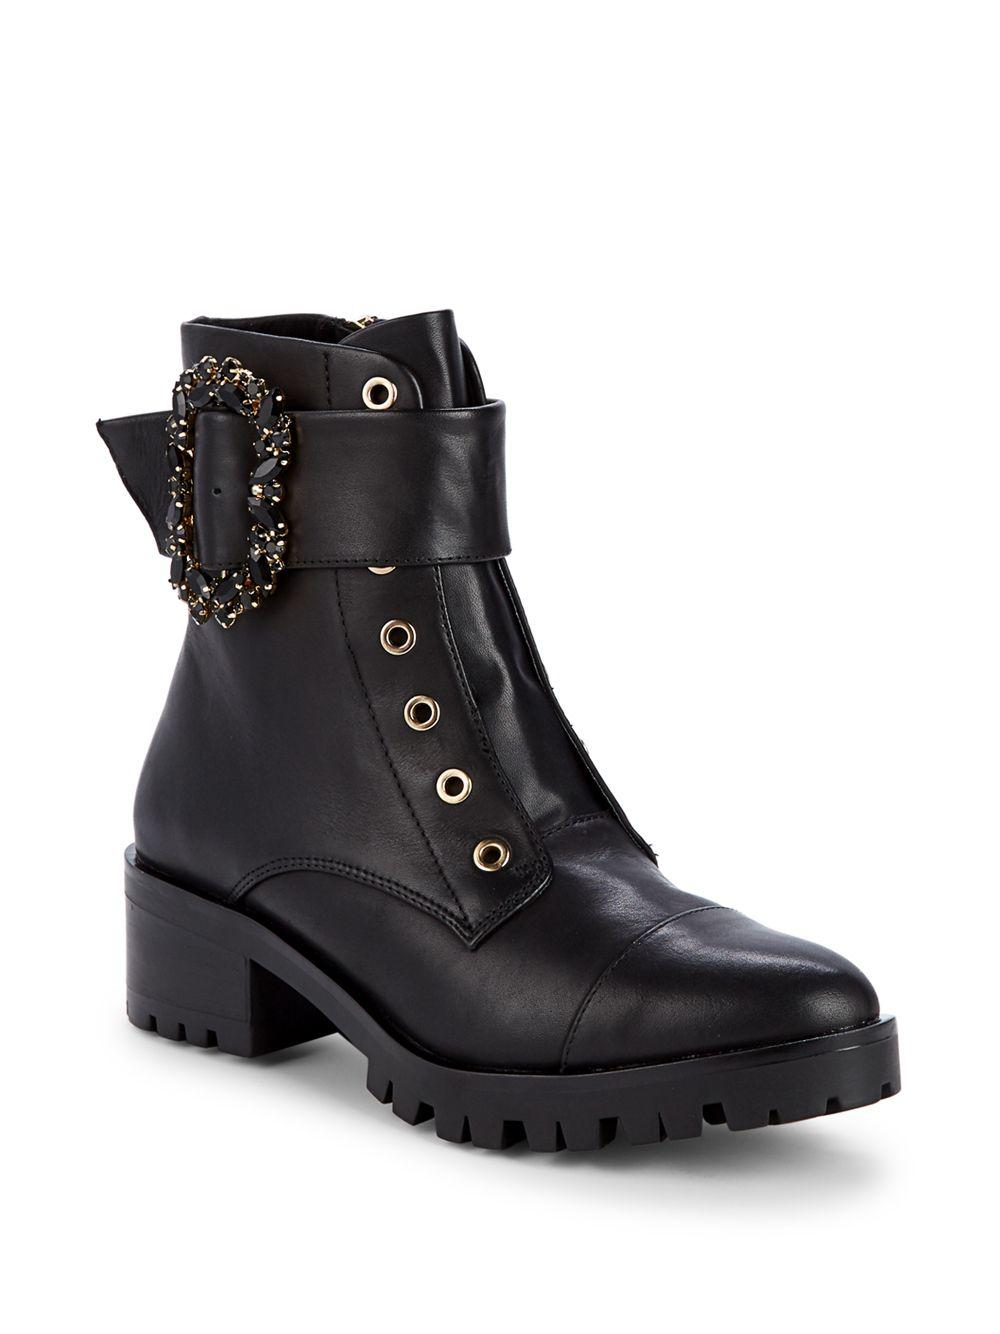 Karl Lagerfeld Piper Embellished Leather Combat Boots in Black - Lyst